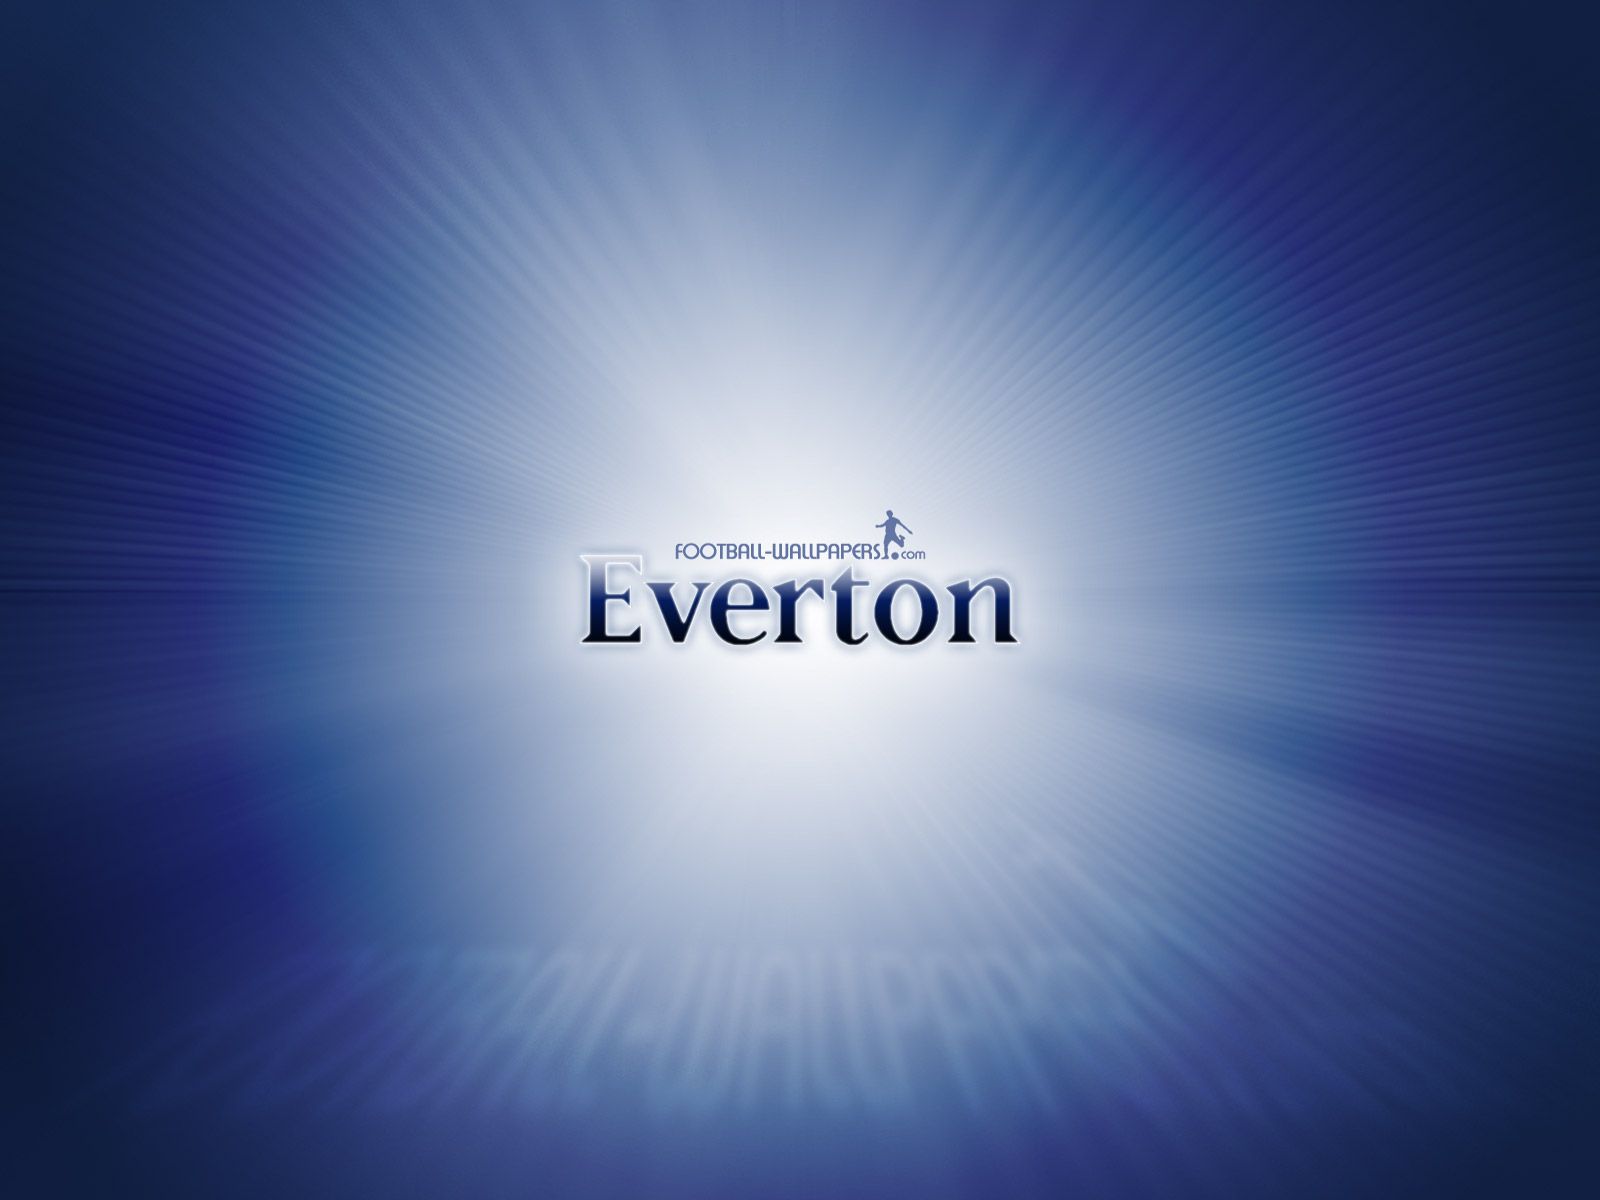 Everton Wallpaper #2 | Football Wallpapers and Videos